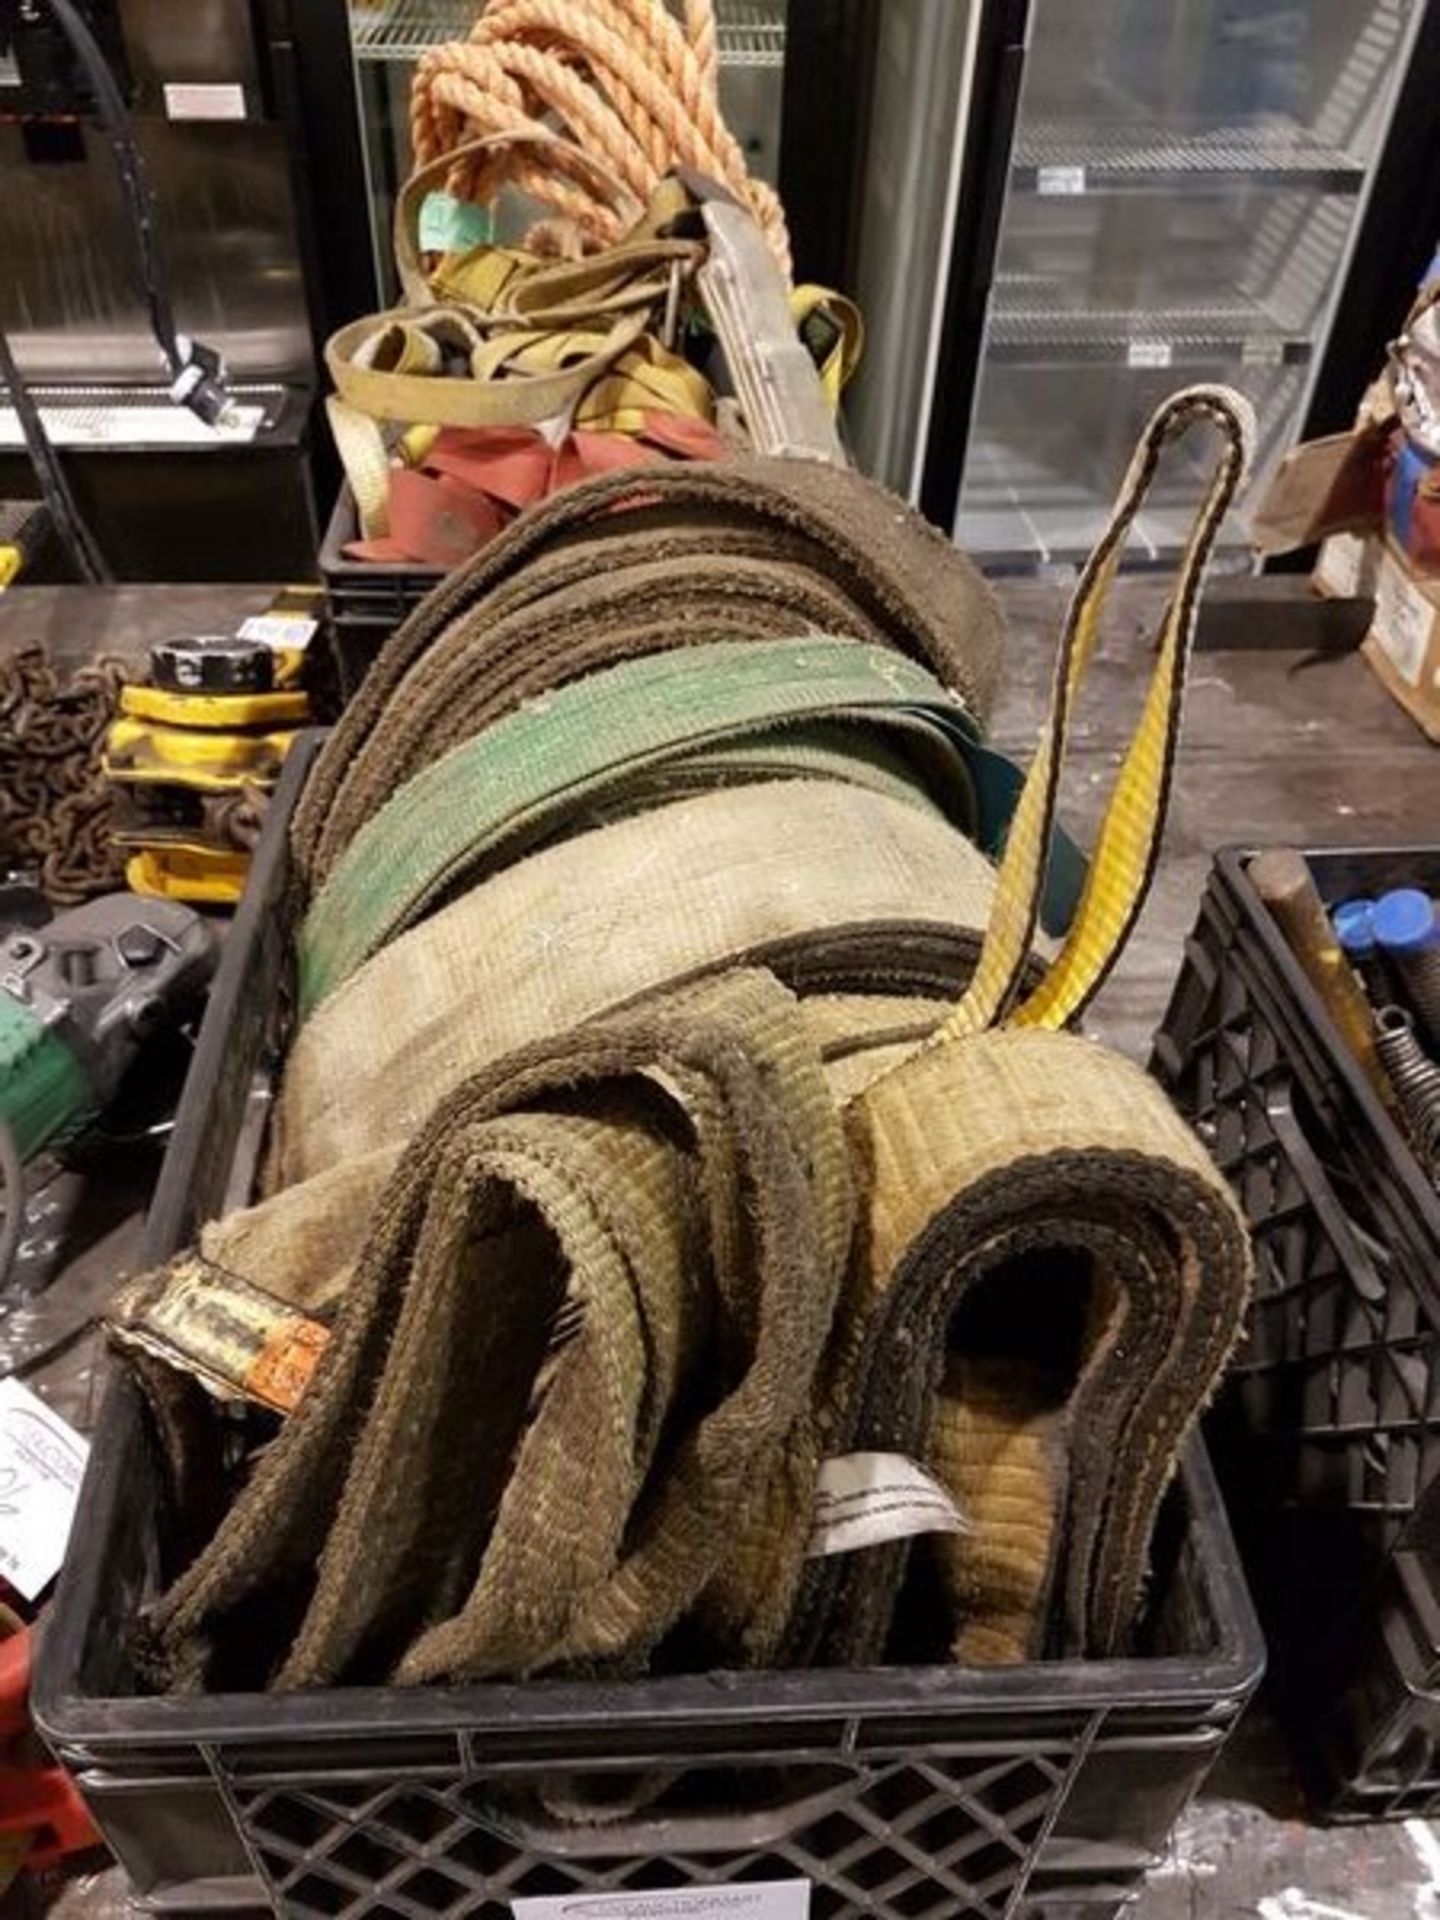 Crate of Loading Straps - Image 2 of 2